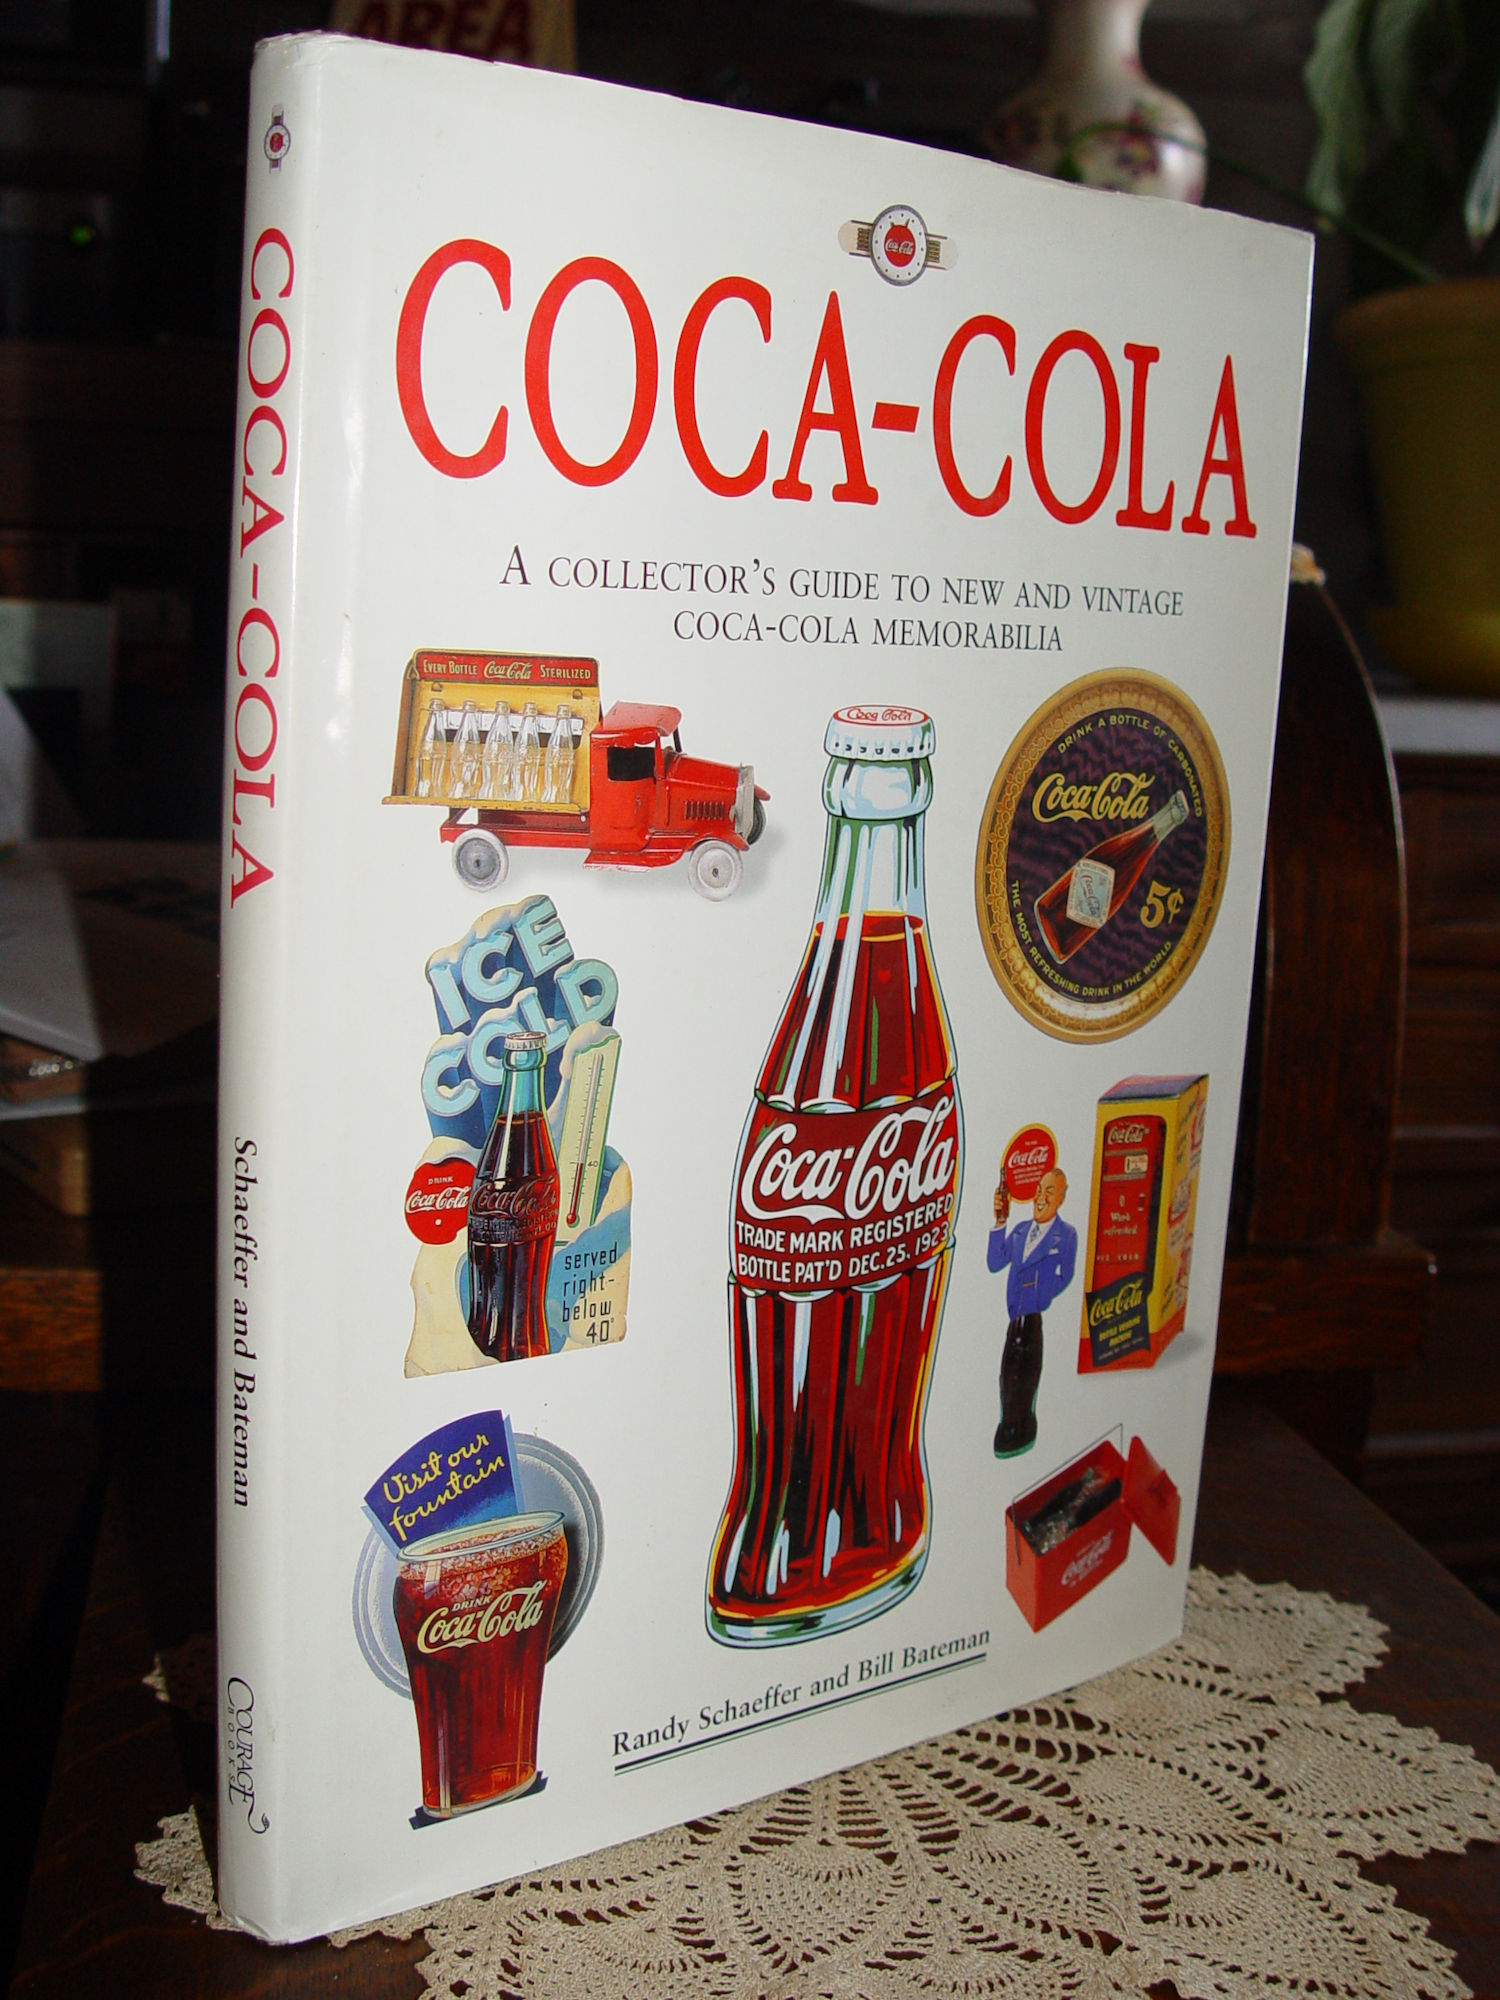 Collector's Guide to new and vintage
                        Coca-Cola Memorabilia by Randy Schaeffer and
                        Bill Bateman 1995